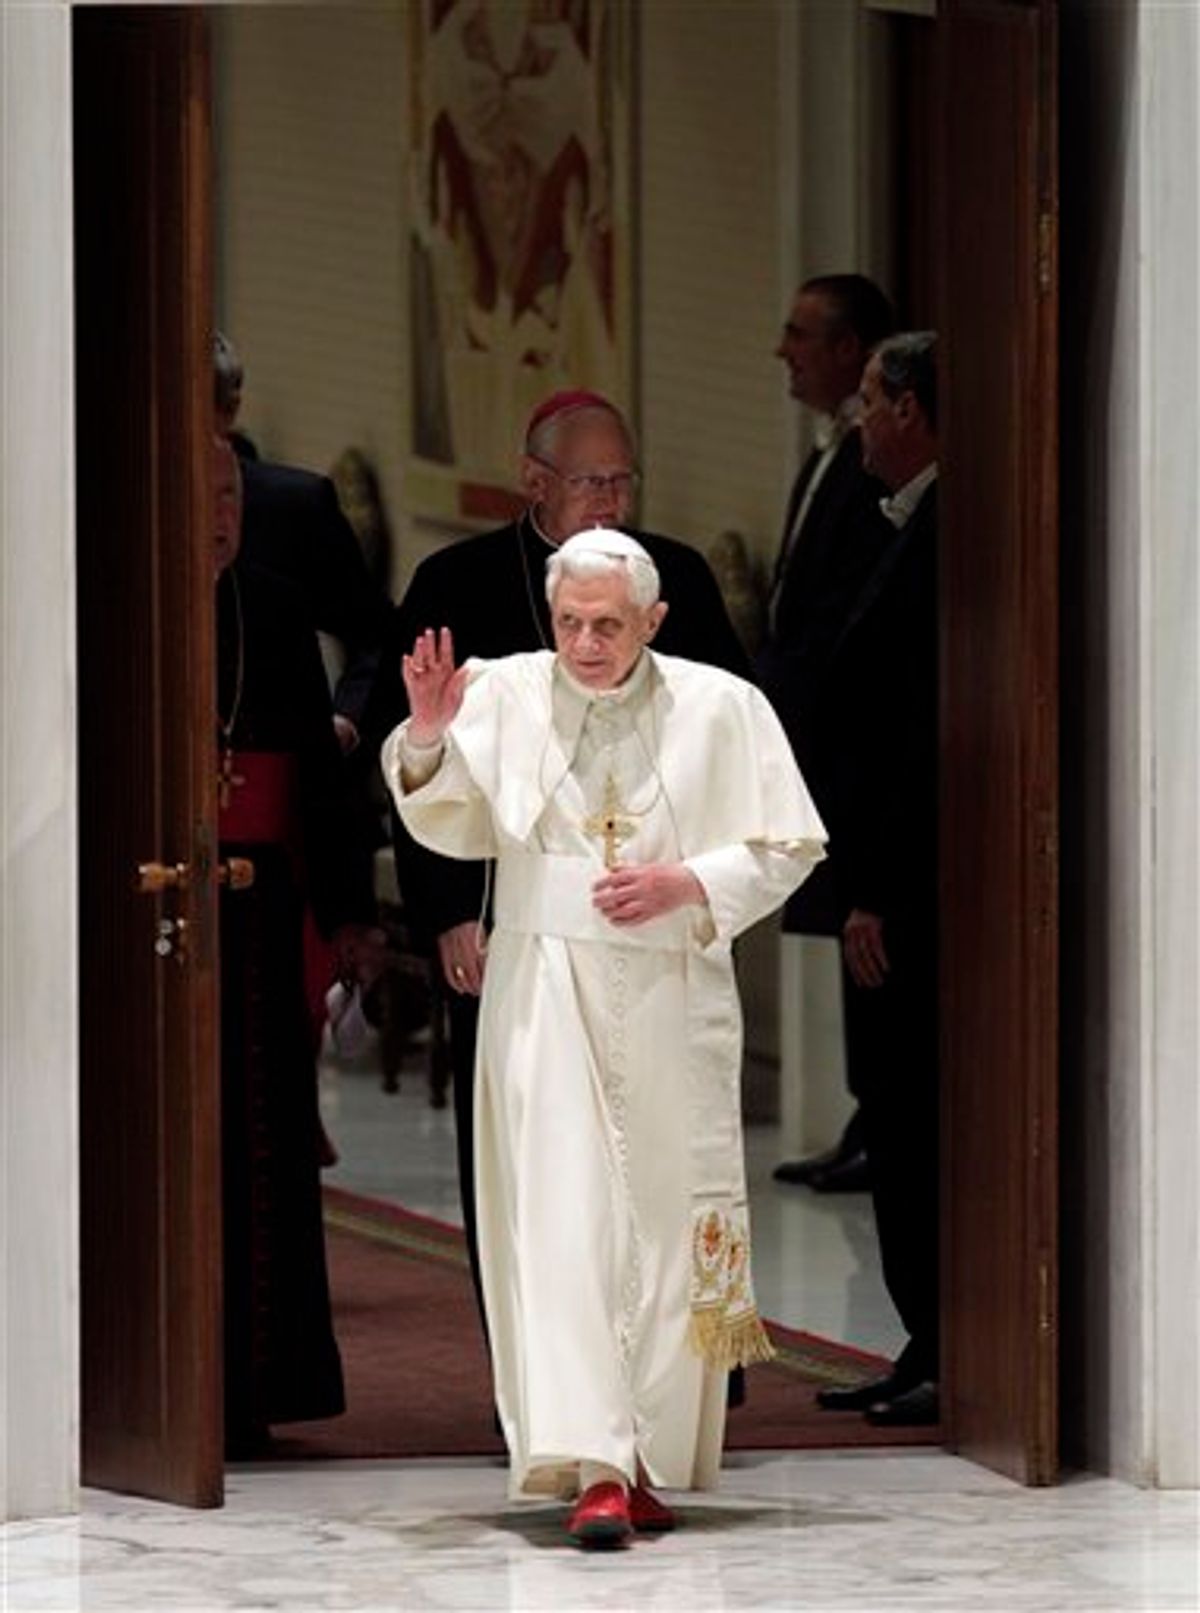 Pope Benedict XVI delivers his blessing as he arrives in the Paul VI hall for the weekly general audience at the Vatican, Wednesday, Jan. 19, 2011. (AP Photo/Andrew Medichini) (AP)